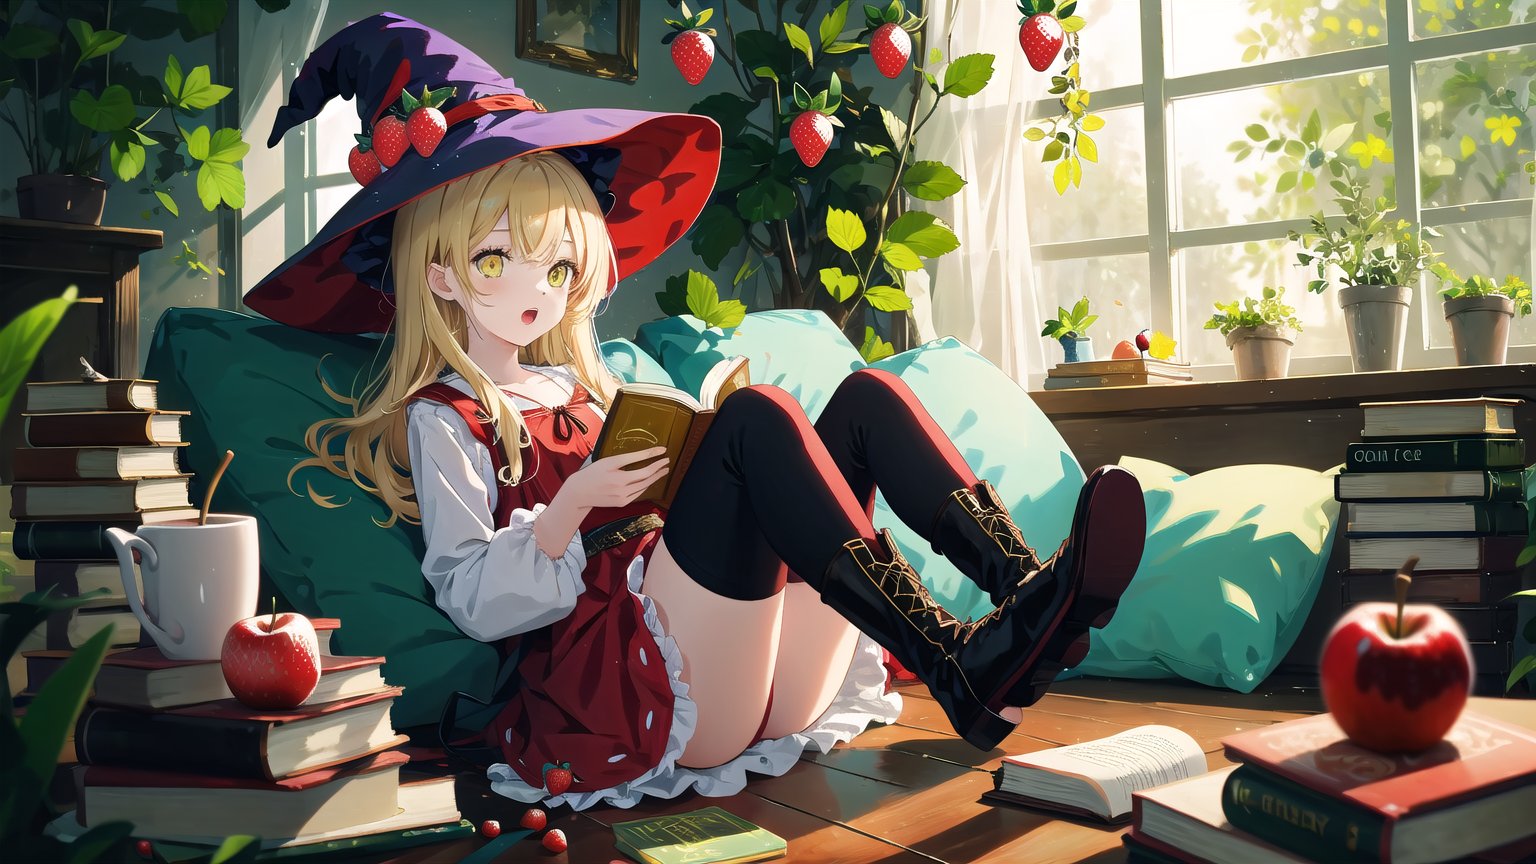 1girl, apple, balloon, berry, blonde_hair, blurry, blurry_foreground, book, boots, branch, cherry, depth_of_field, dress, food, fruit, hat, holding_book, long_hair, mushroom, open_book, open_mouth, reading, red_apple, red_flower, sitting, solo, strawberry, tree, witch, witch_hat, yellow_eyes, backlight, colors